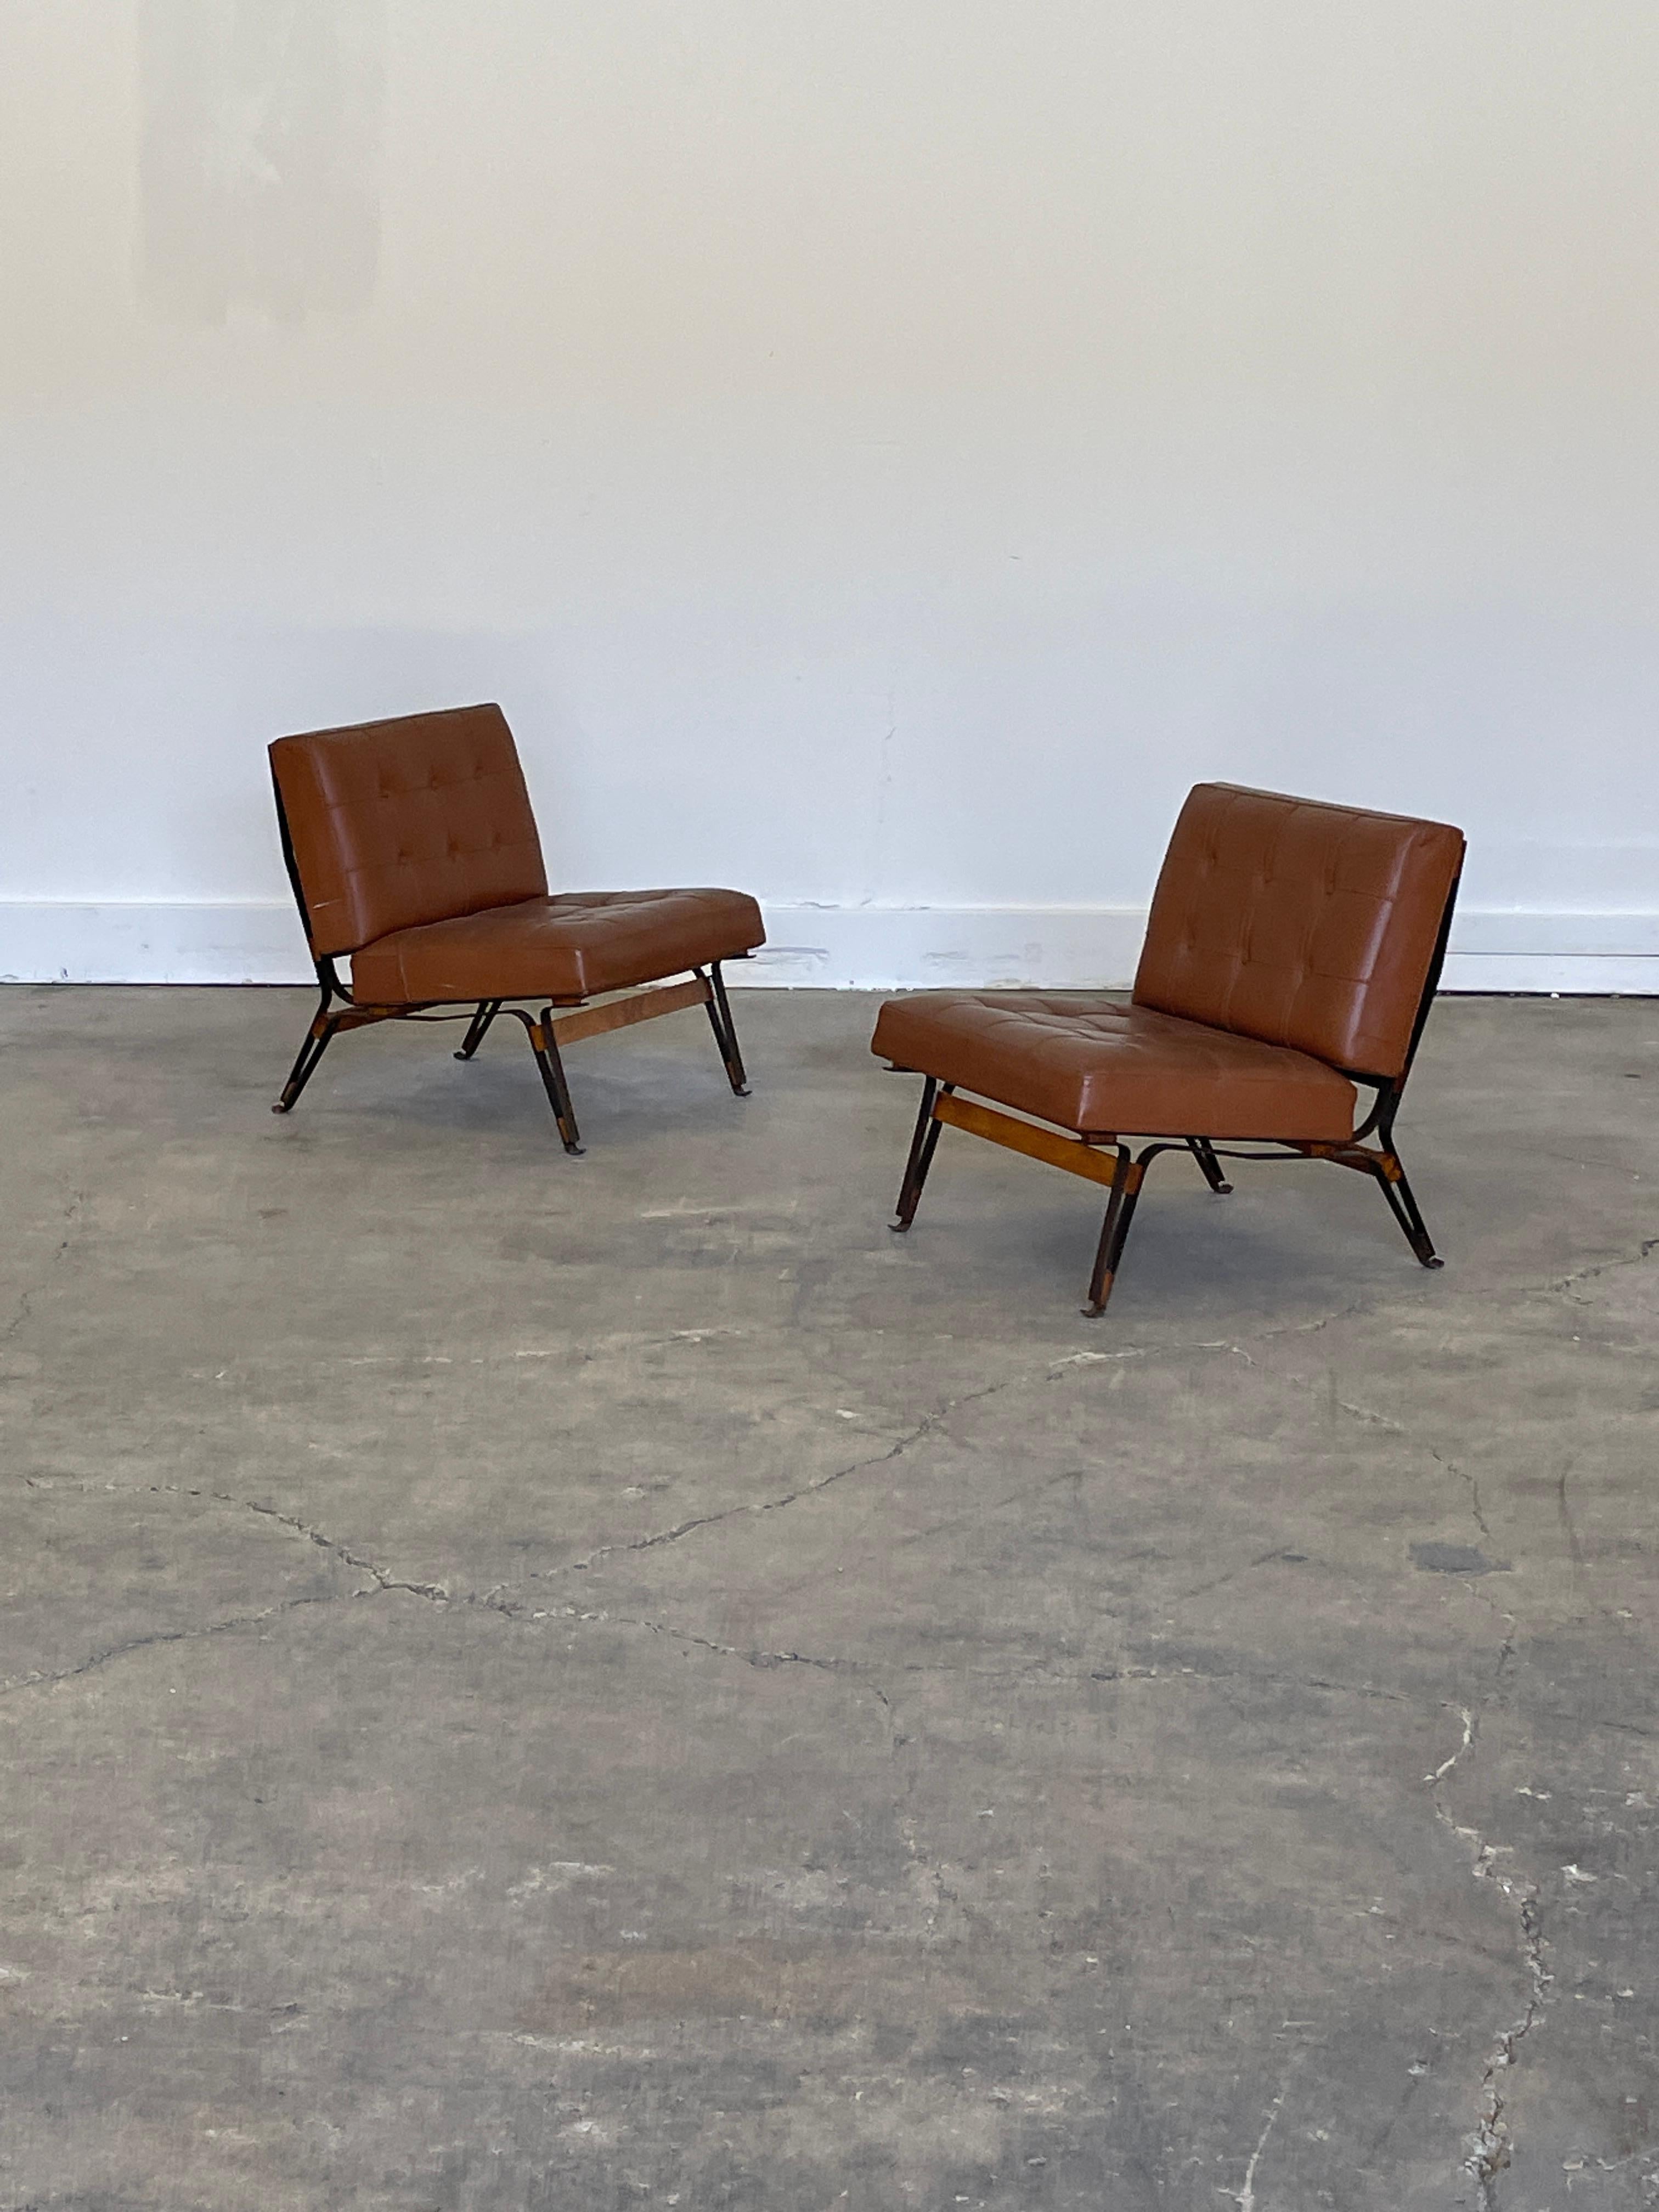 Model 856 Rare Pair of Matched Leather Lounge Chairs by Ico Parisi, 1950s In Good Condition For Sale In Skokie, IL